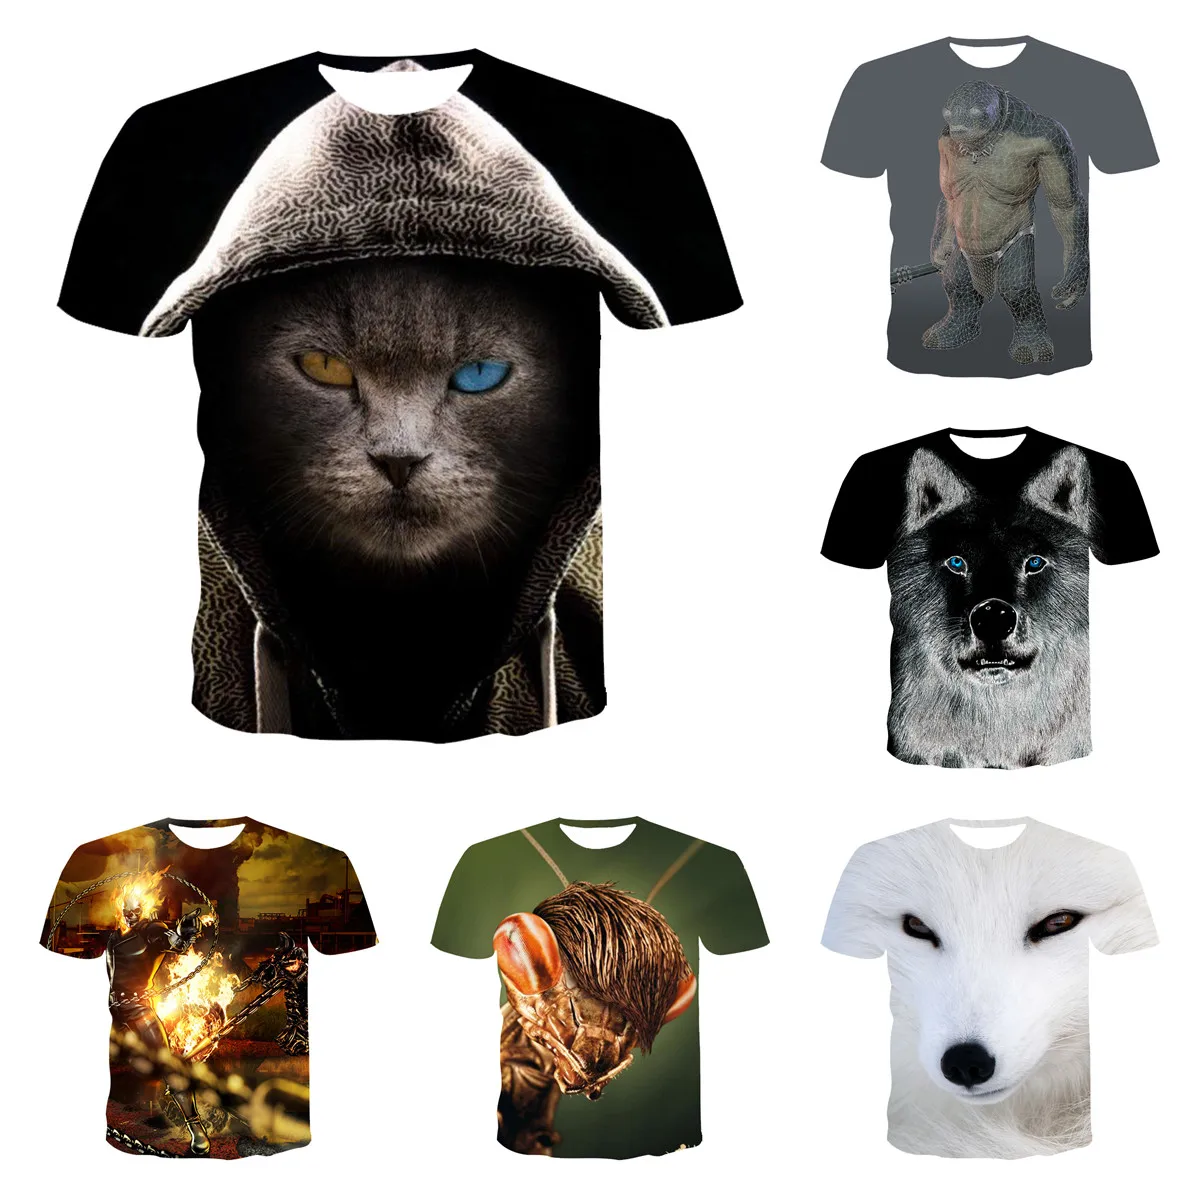 

Summer Top New Free Delivery 3D Printing T-shirt Men's T-shirt Home Fun T-shirt Animal Camisa Polyester Gothic Skirt Xxs-6xl